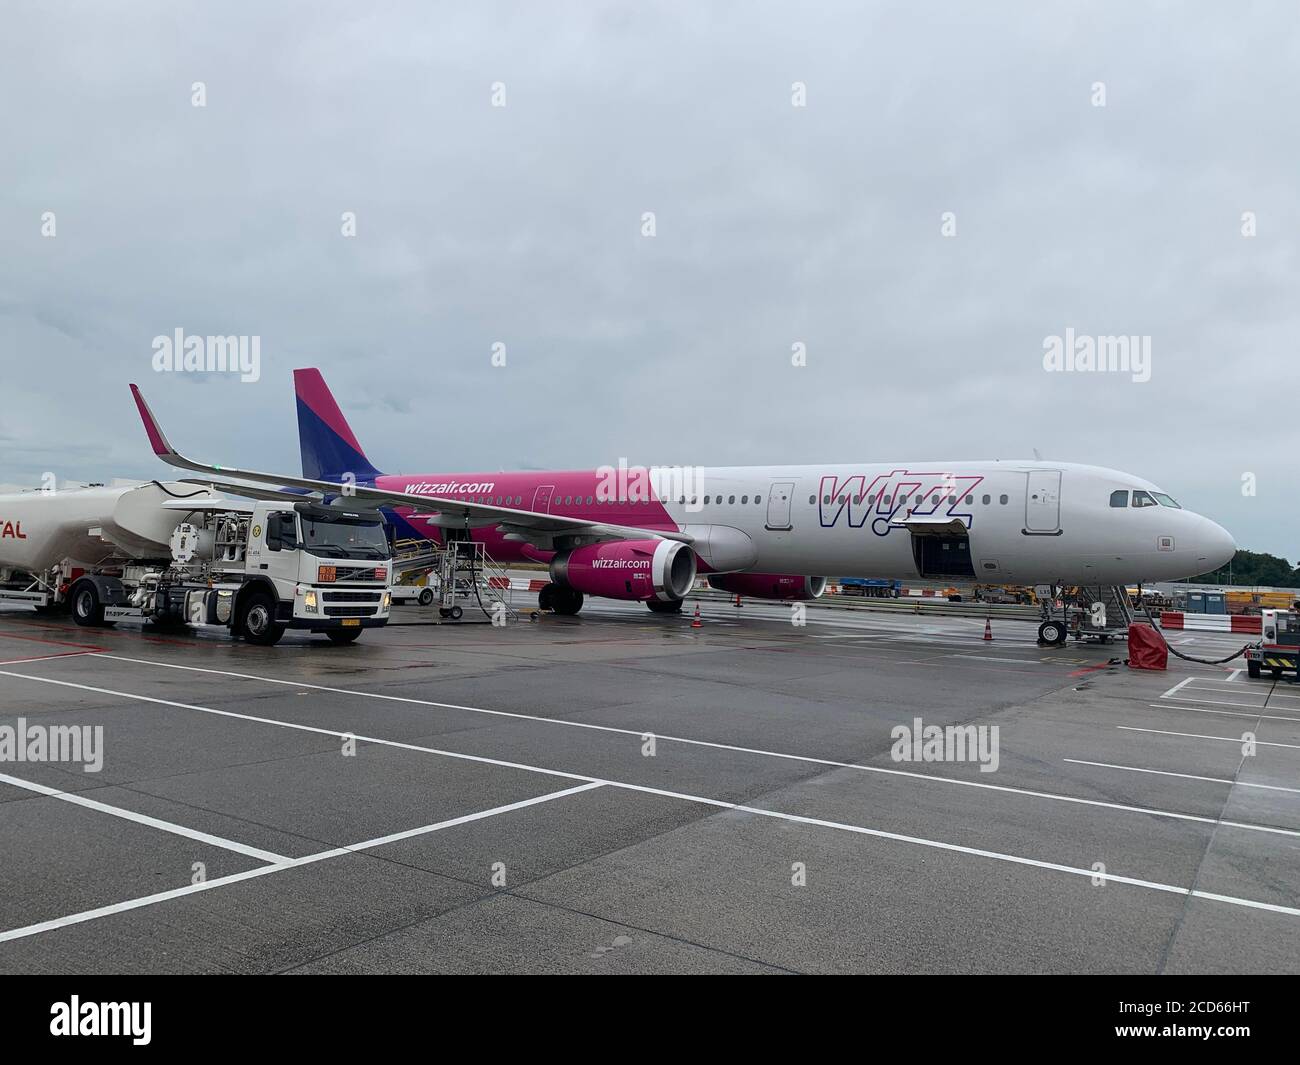 Airbus A321 Wizz air passenger jet airplane at Eindhoven airport. Eindhoven, North Brabant / Netherlands. Stock Photo